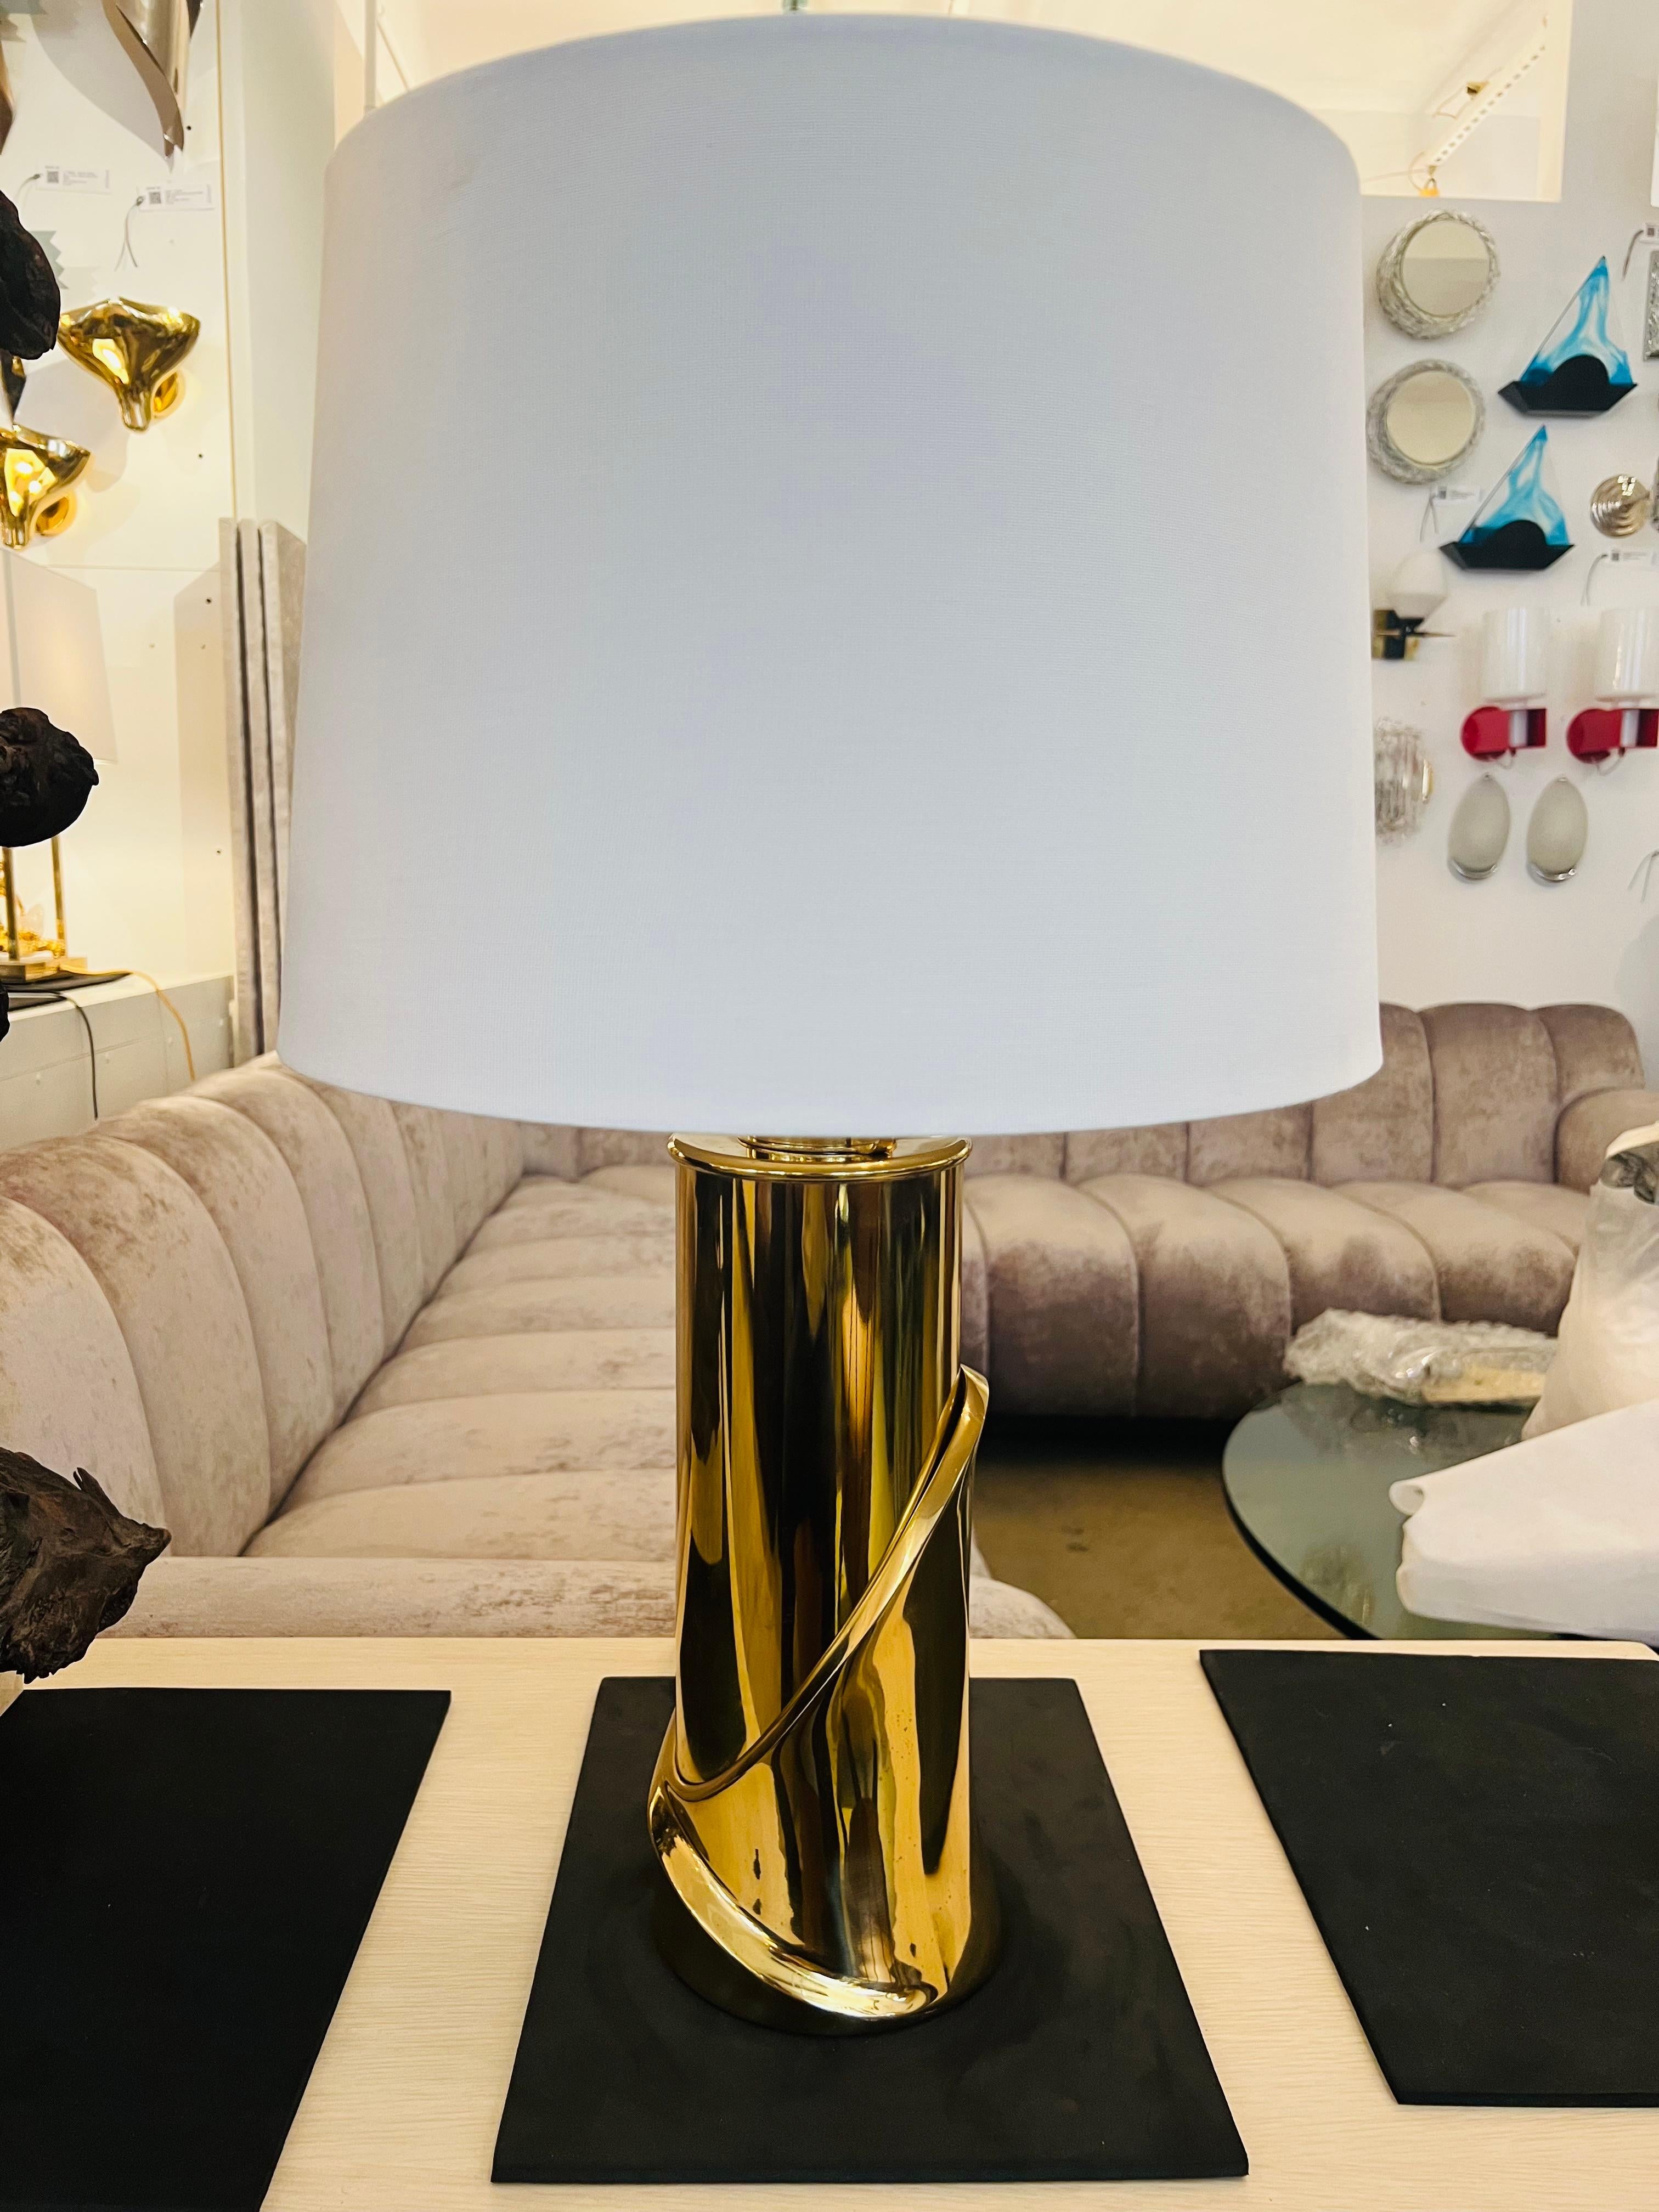 A polished bronze sculptural table lamp with a polished brass sockets by Luciano Frigerio. Newly rewired.